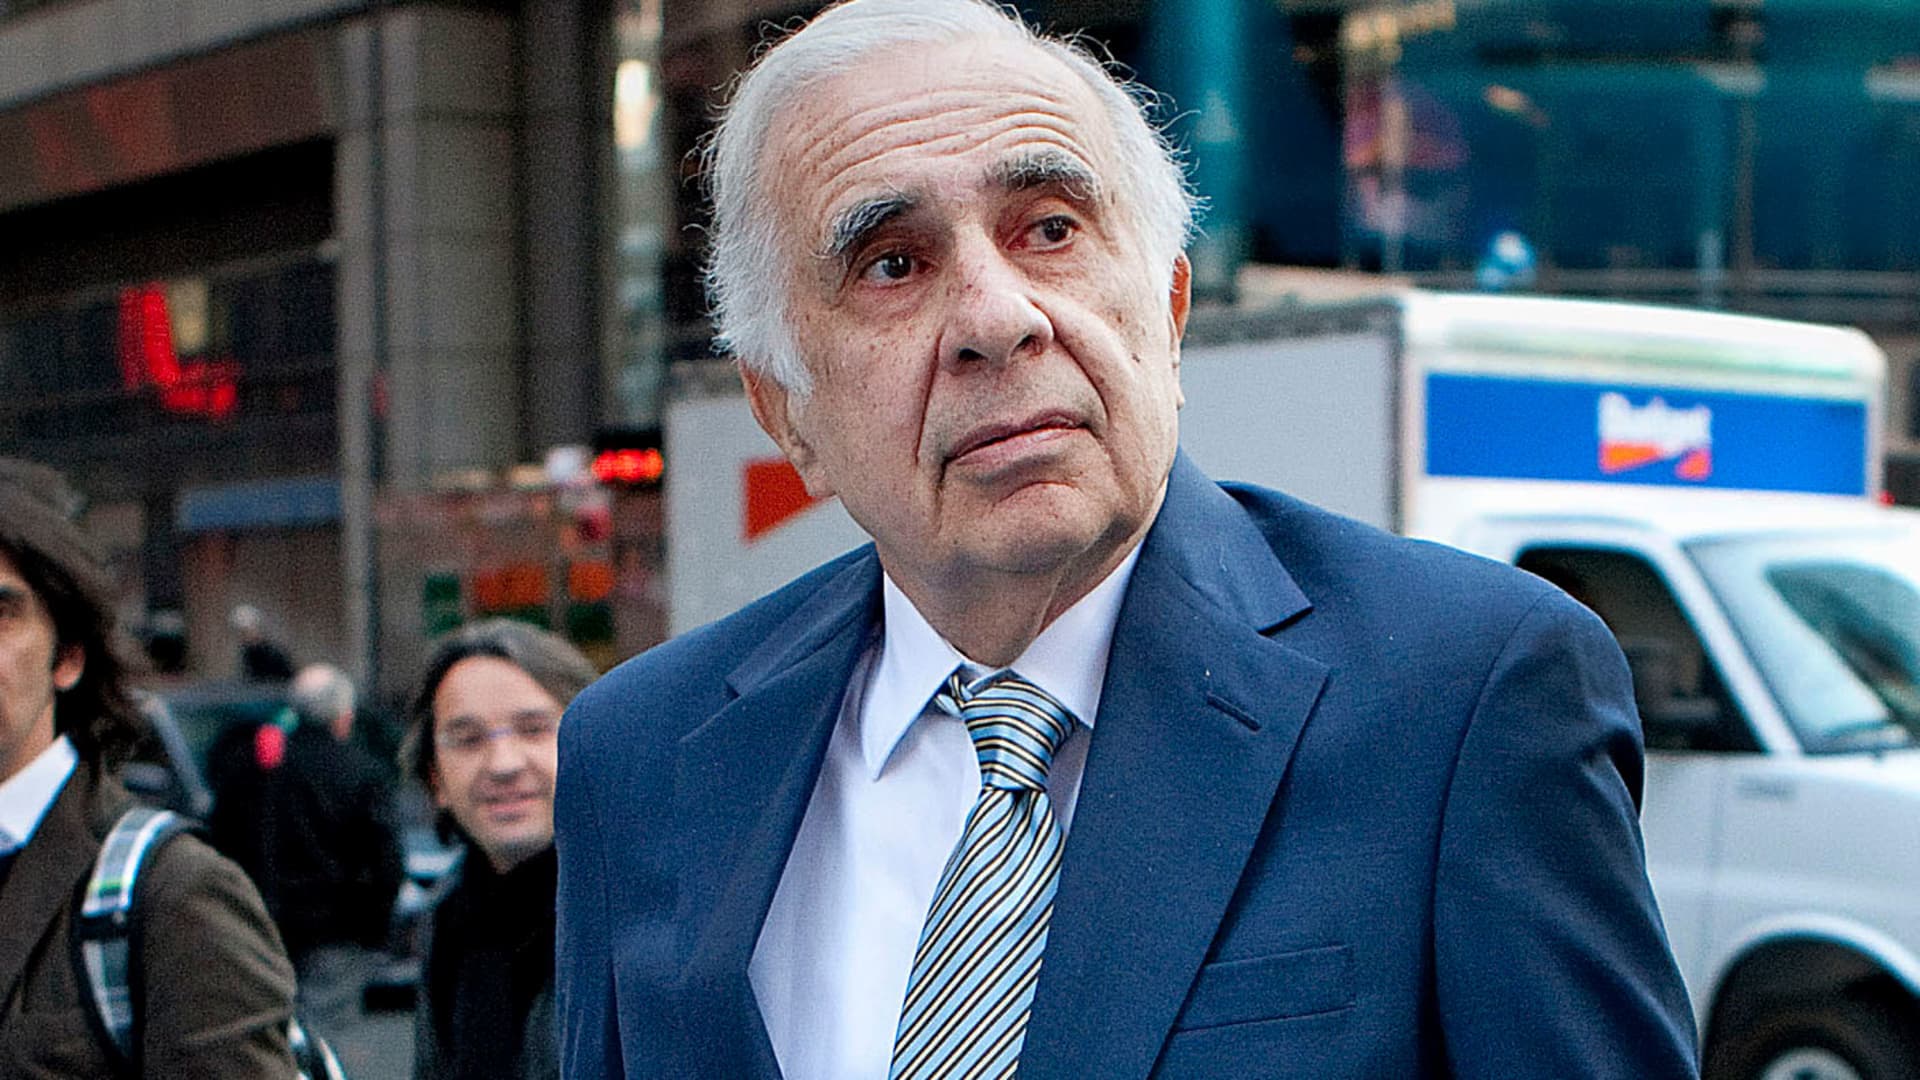 Carl Icahn says Illumina’s appeal of FTC order to divest Grail is ‘an almost impossible battle’